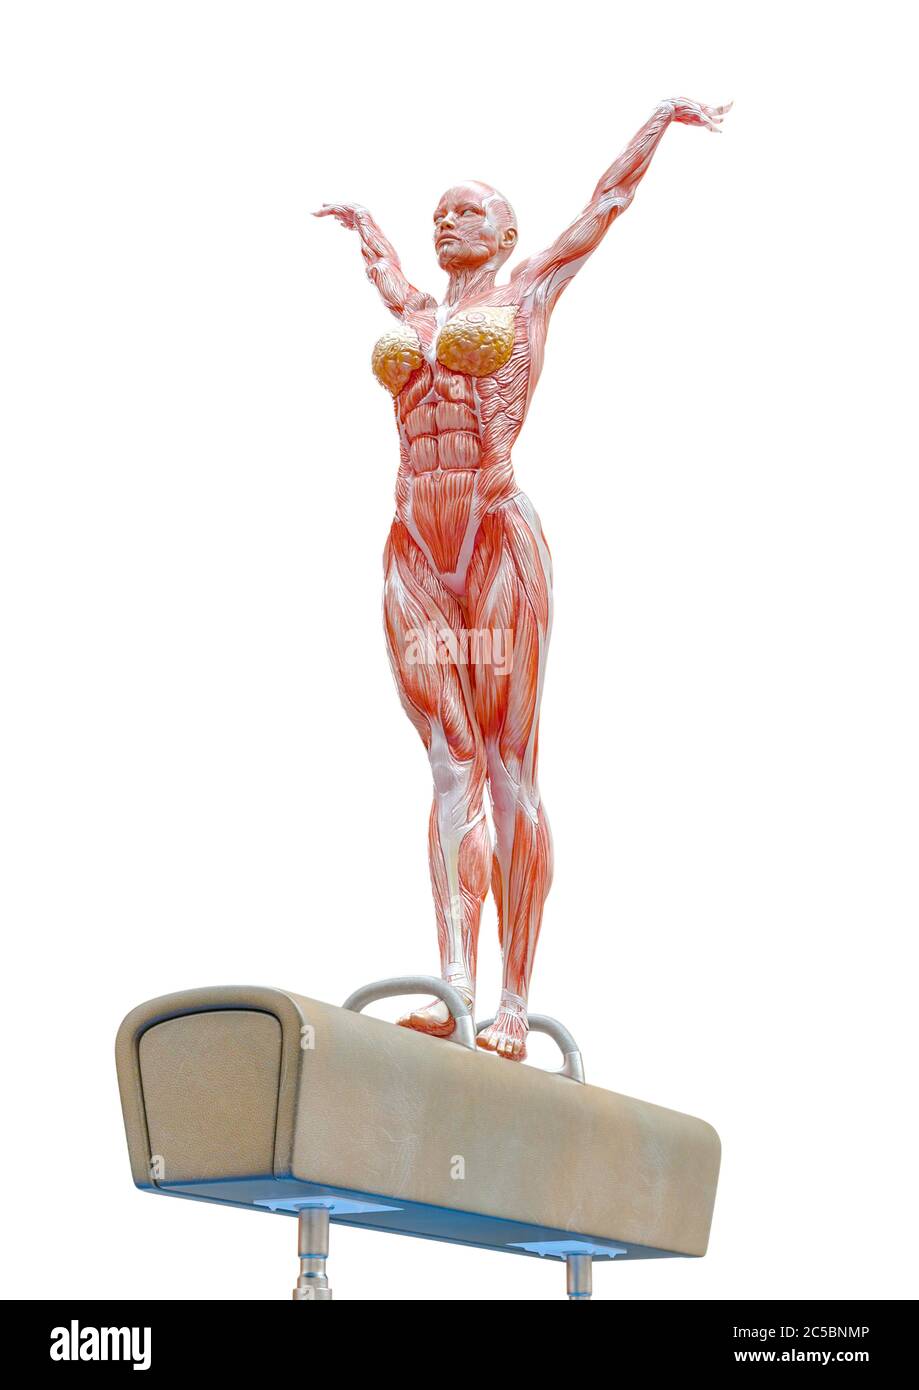 muscle woman doing a gymnastic on pommel horse in white background close up, 3d illustration Stock Photo